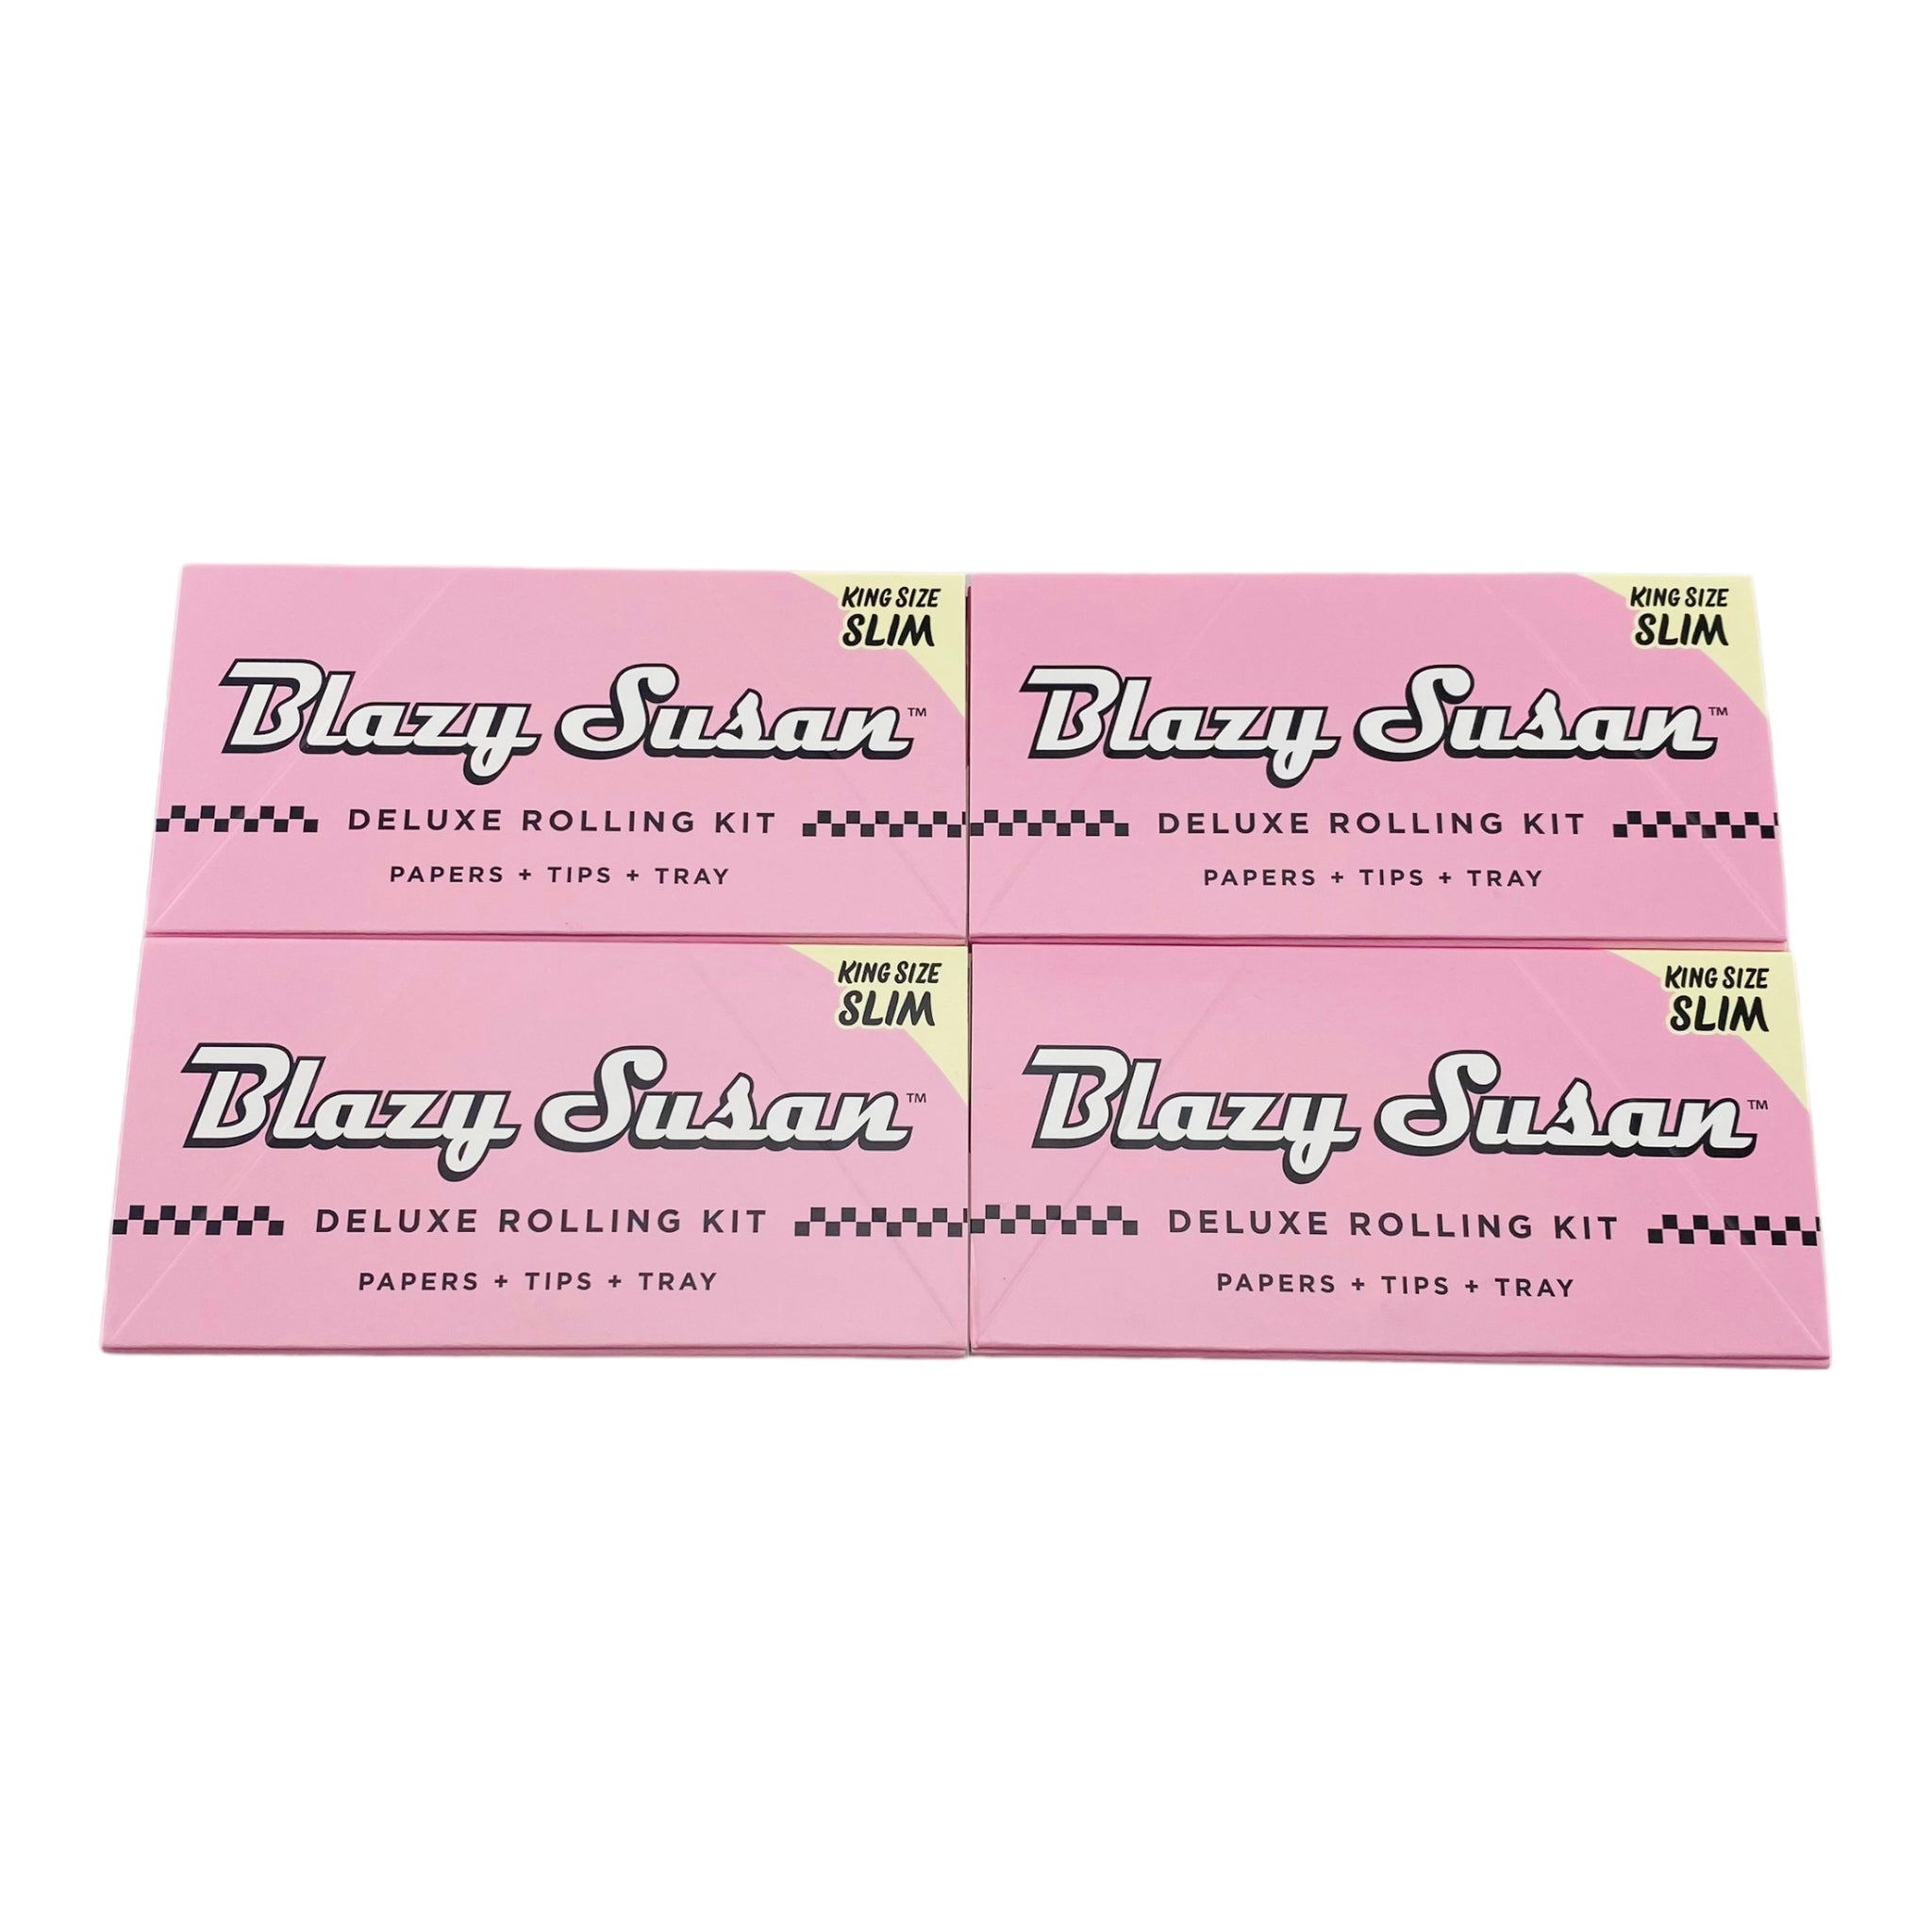 Blazy Susan Pink Deluxe Rolling Kit King Size Slim 4-pack